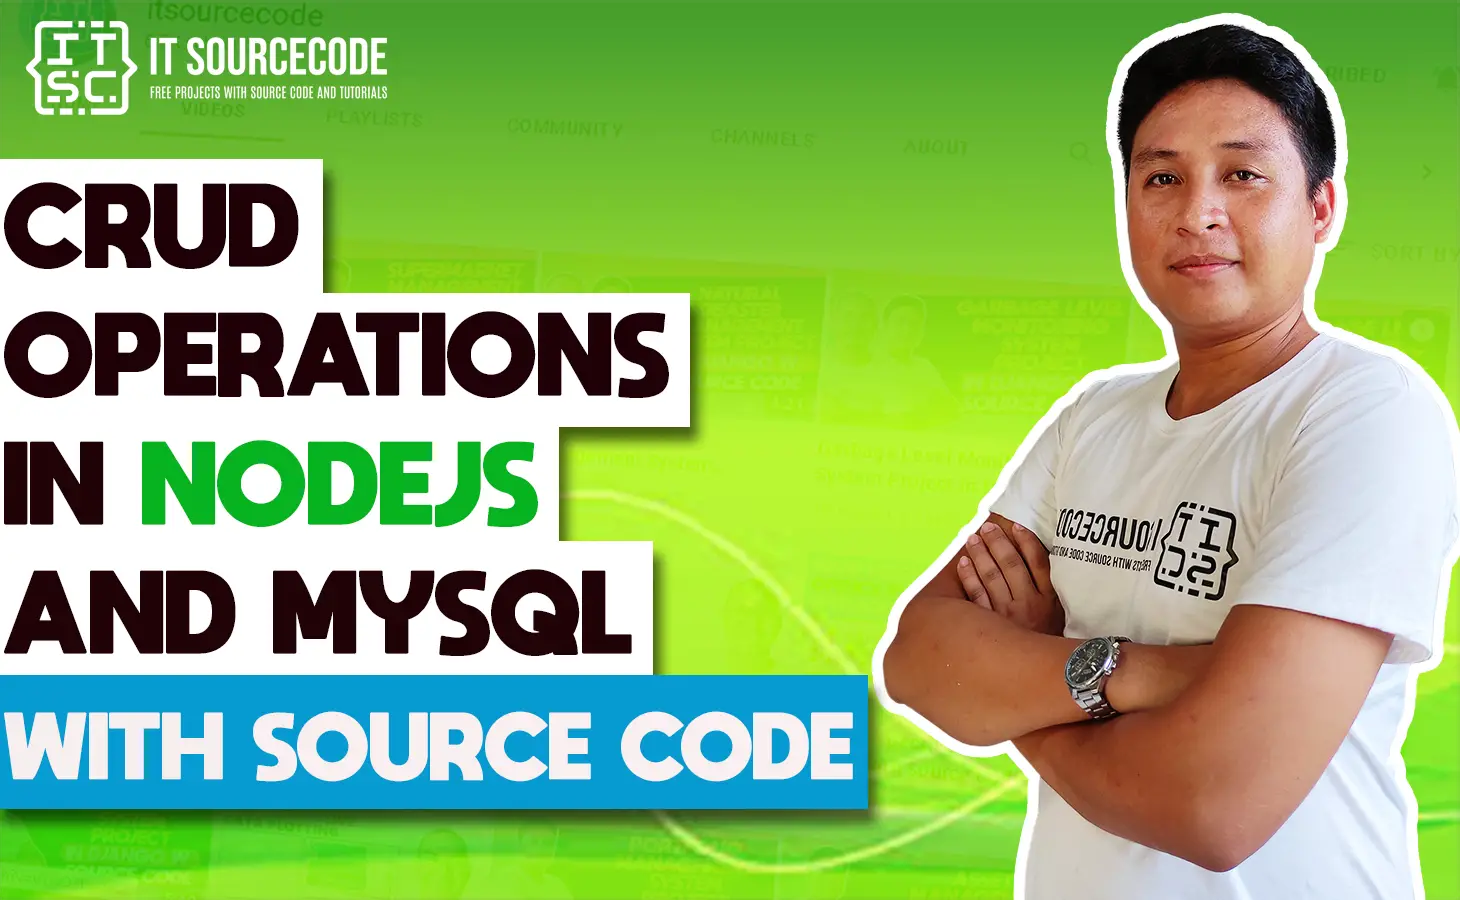 Crud Operation in Nodejs and MySQL with Source Code